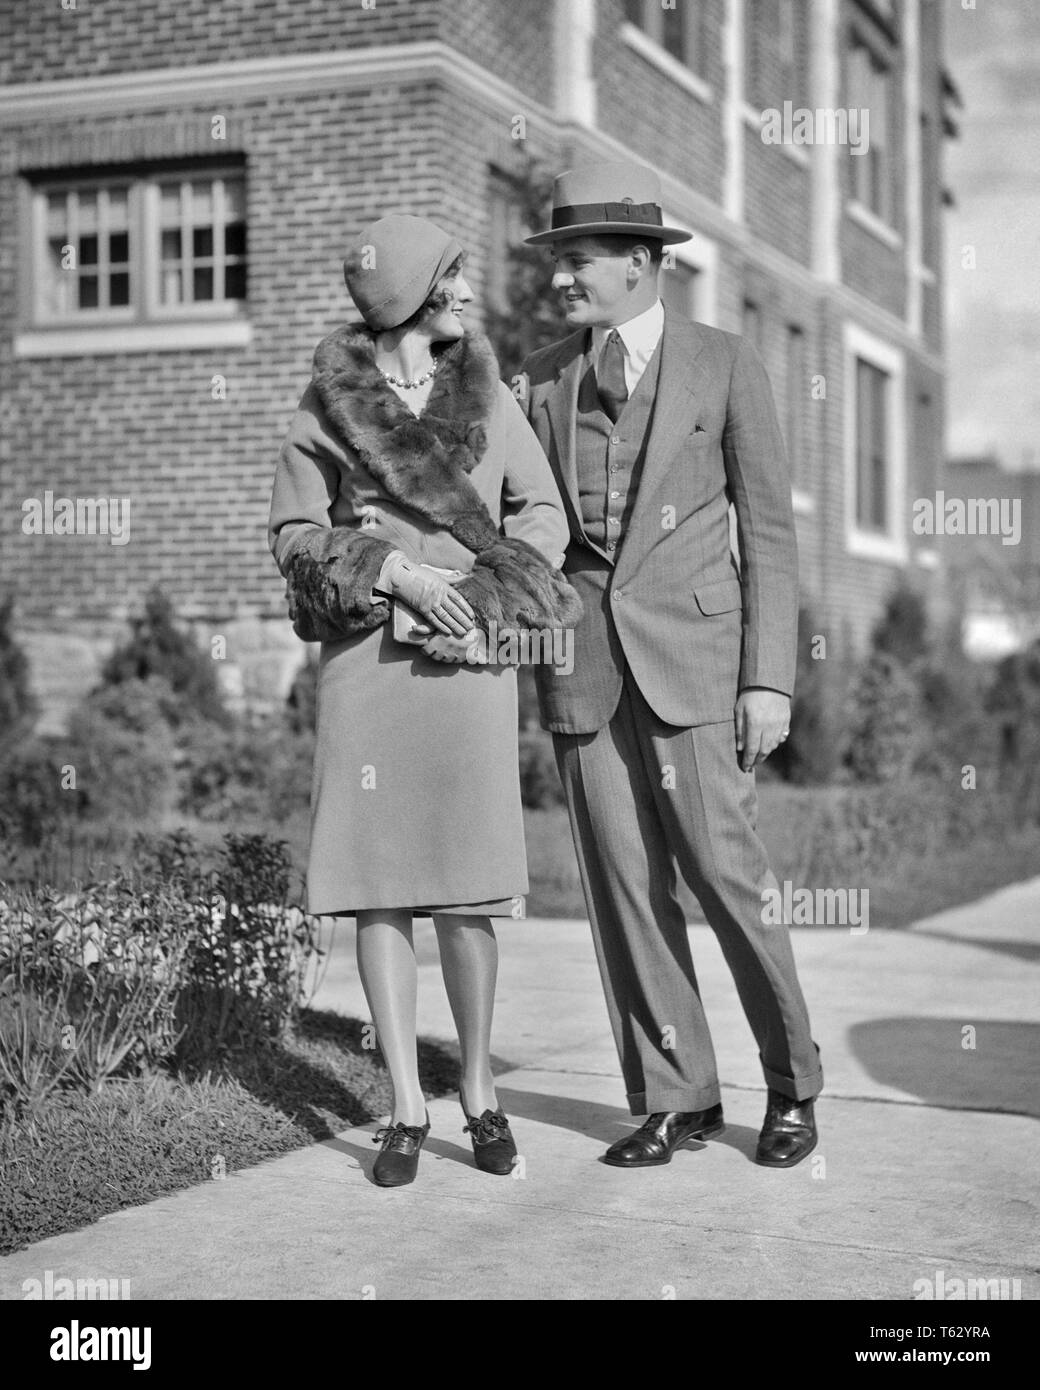 1920s SMILING COUPLE MAN WOMAN WALKING ARM IN ARM WOMAN WEARING COAT WITH FUR TRIM - p2488 HAR001 HARS LIFESTYLE FEMALES MARRIED SPOUSE HUSBANDS HEALTHINESS HOME LIFE COPY SPACE FRIENDSHIP FULL-LENGTH LADIES PERSONS MALES B&W SUIT AND TIE HAPPINESS STYLES CLOCHE TRIM CONNECTION STYLISH COOPERATION FASHIONS MID-ADULT MID-ADULT WOMAN TOGETHERNESS WIVES YOUNG ADULT WOMAN BLACK AND WHITE CAUCASIAN ETHNICITY HAR001 OLD FASHIONED Stock Photo